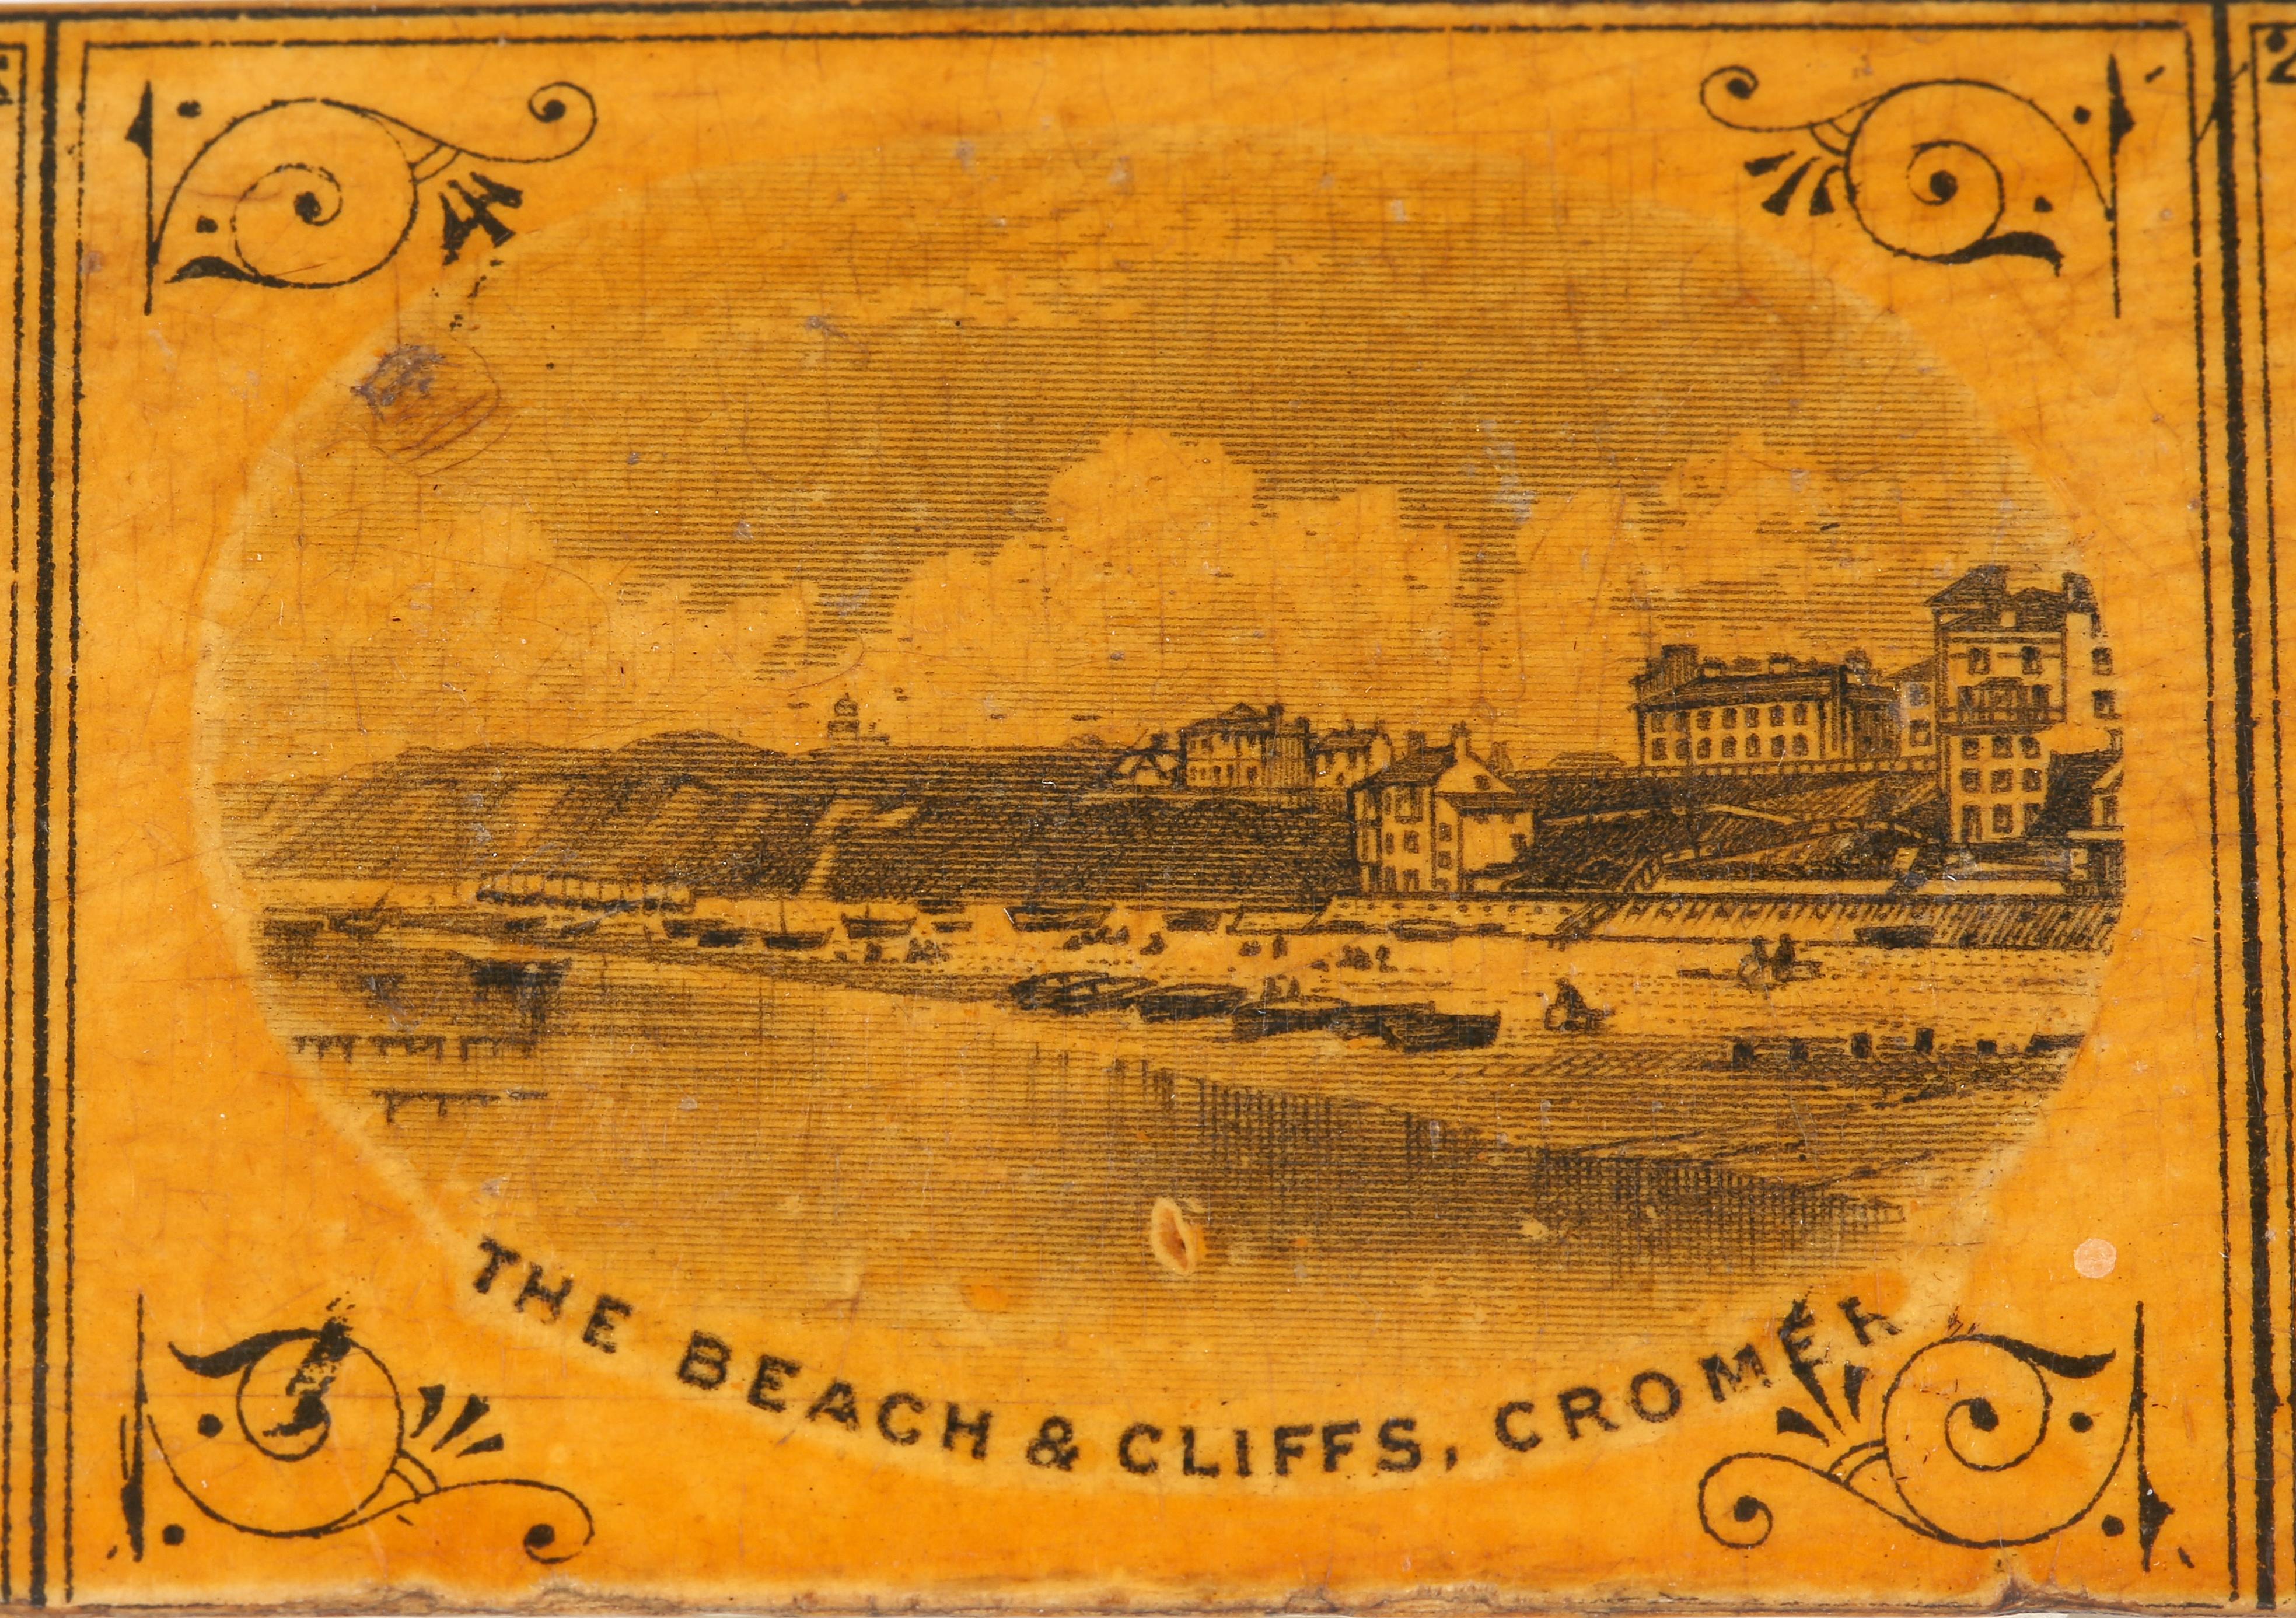 Mauchline Wooden Postal Ruler and Paper Folder with Beach & Cliffs, Cromer For Sale 4